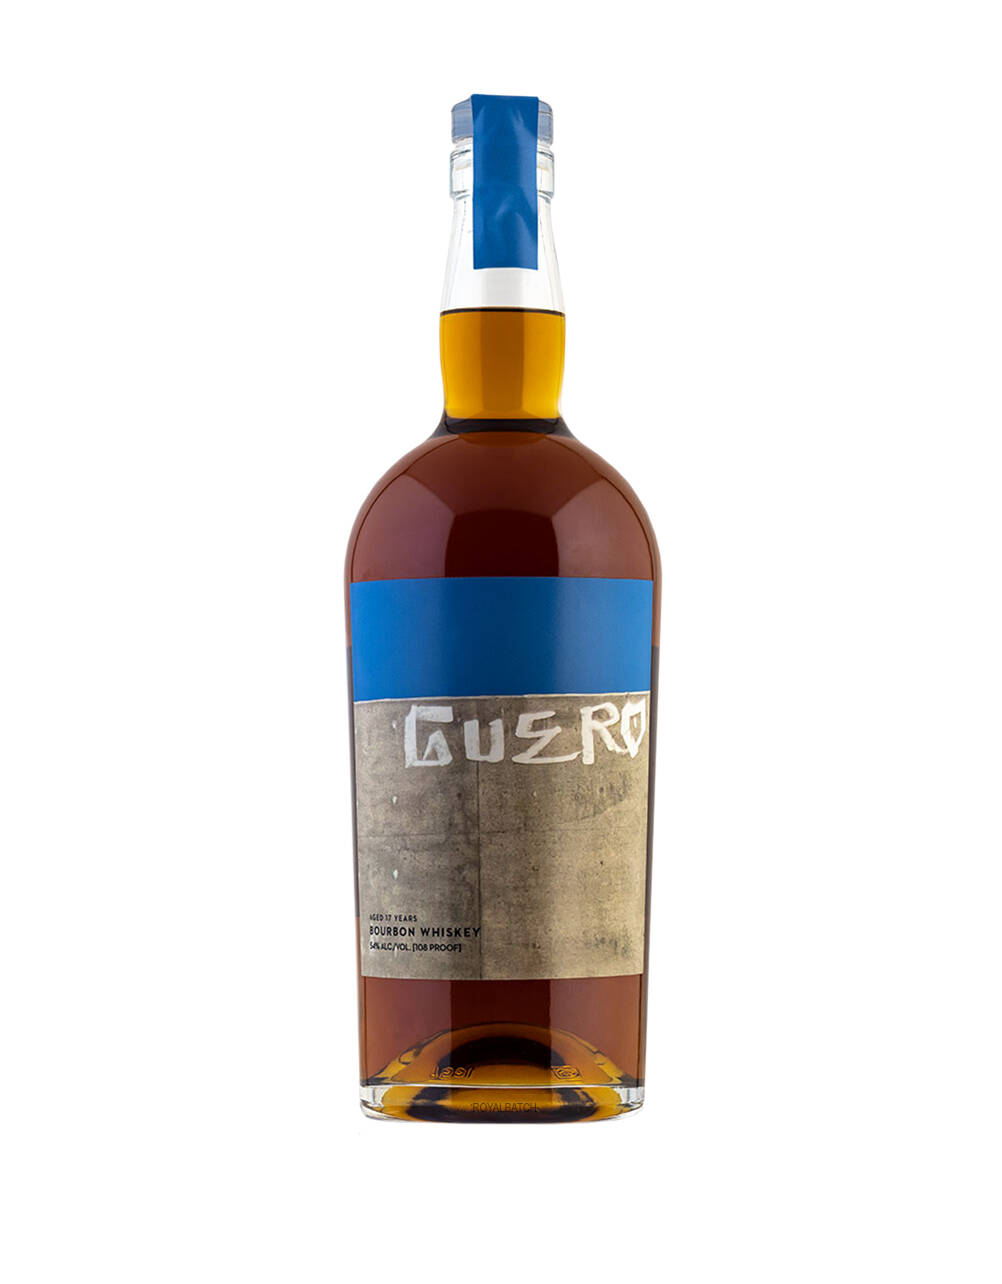 Guero Reserve 17 year Old Bourbon Whiskey